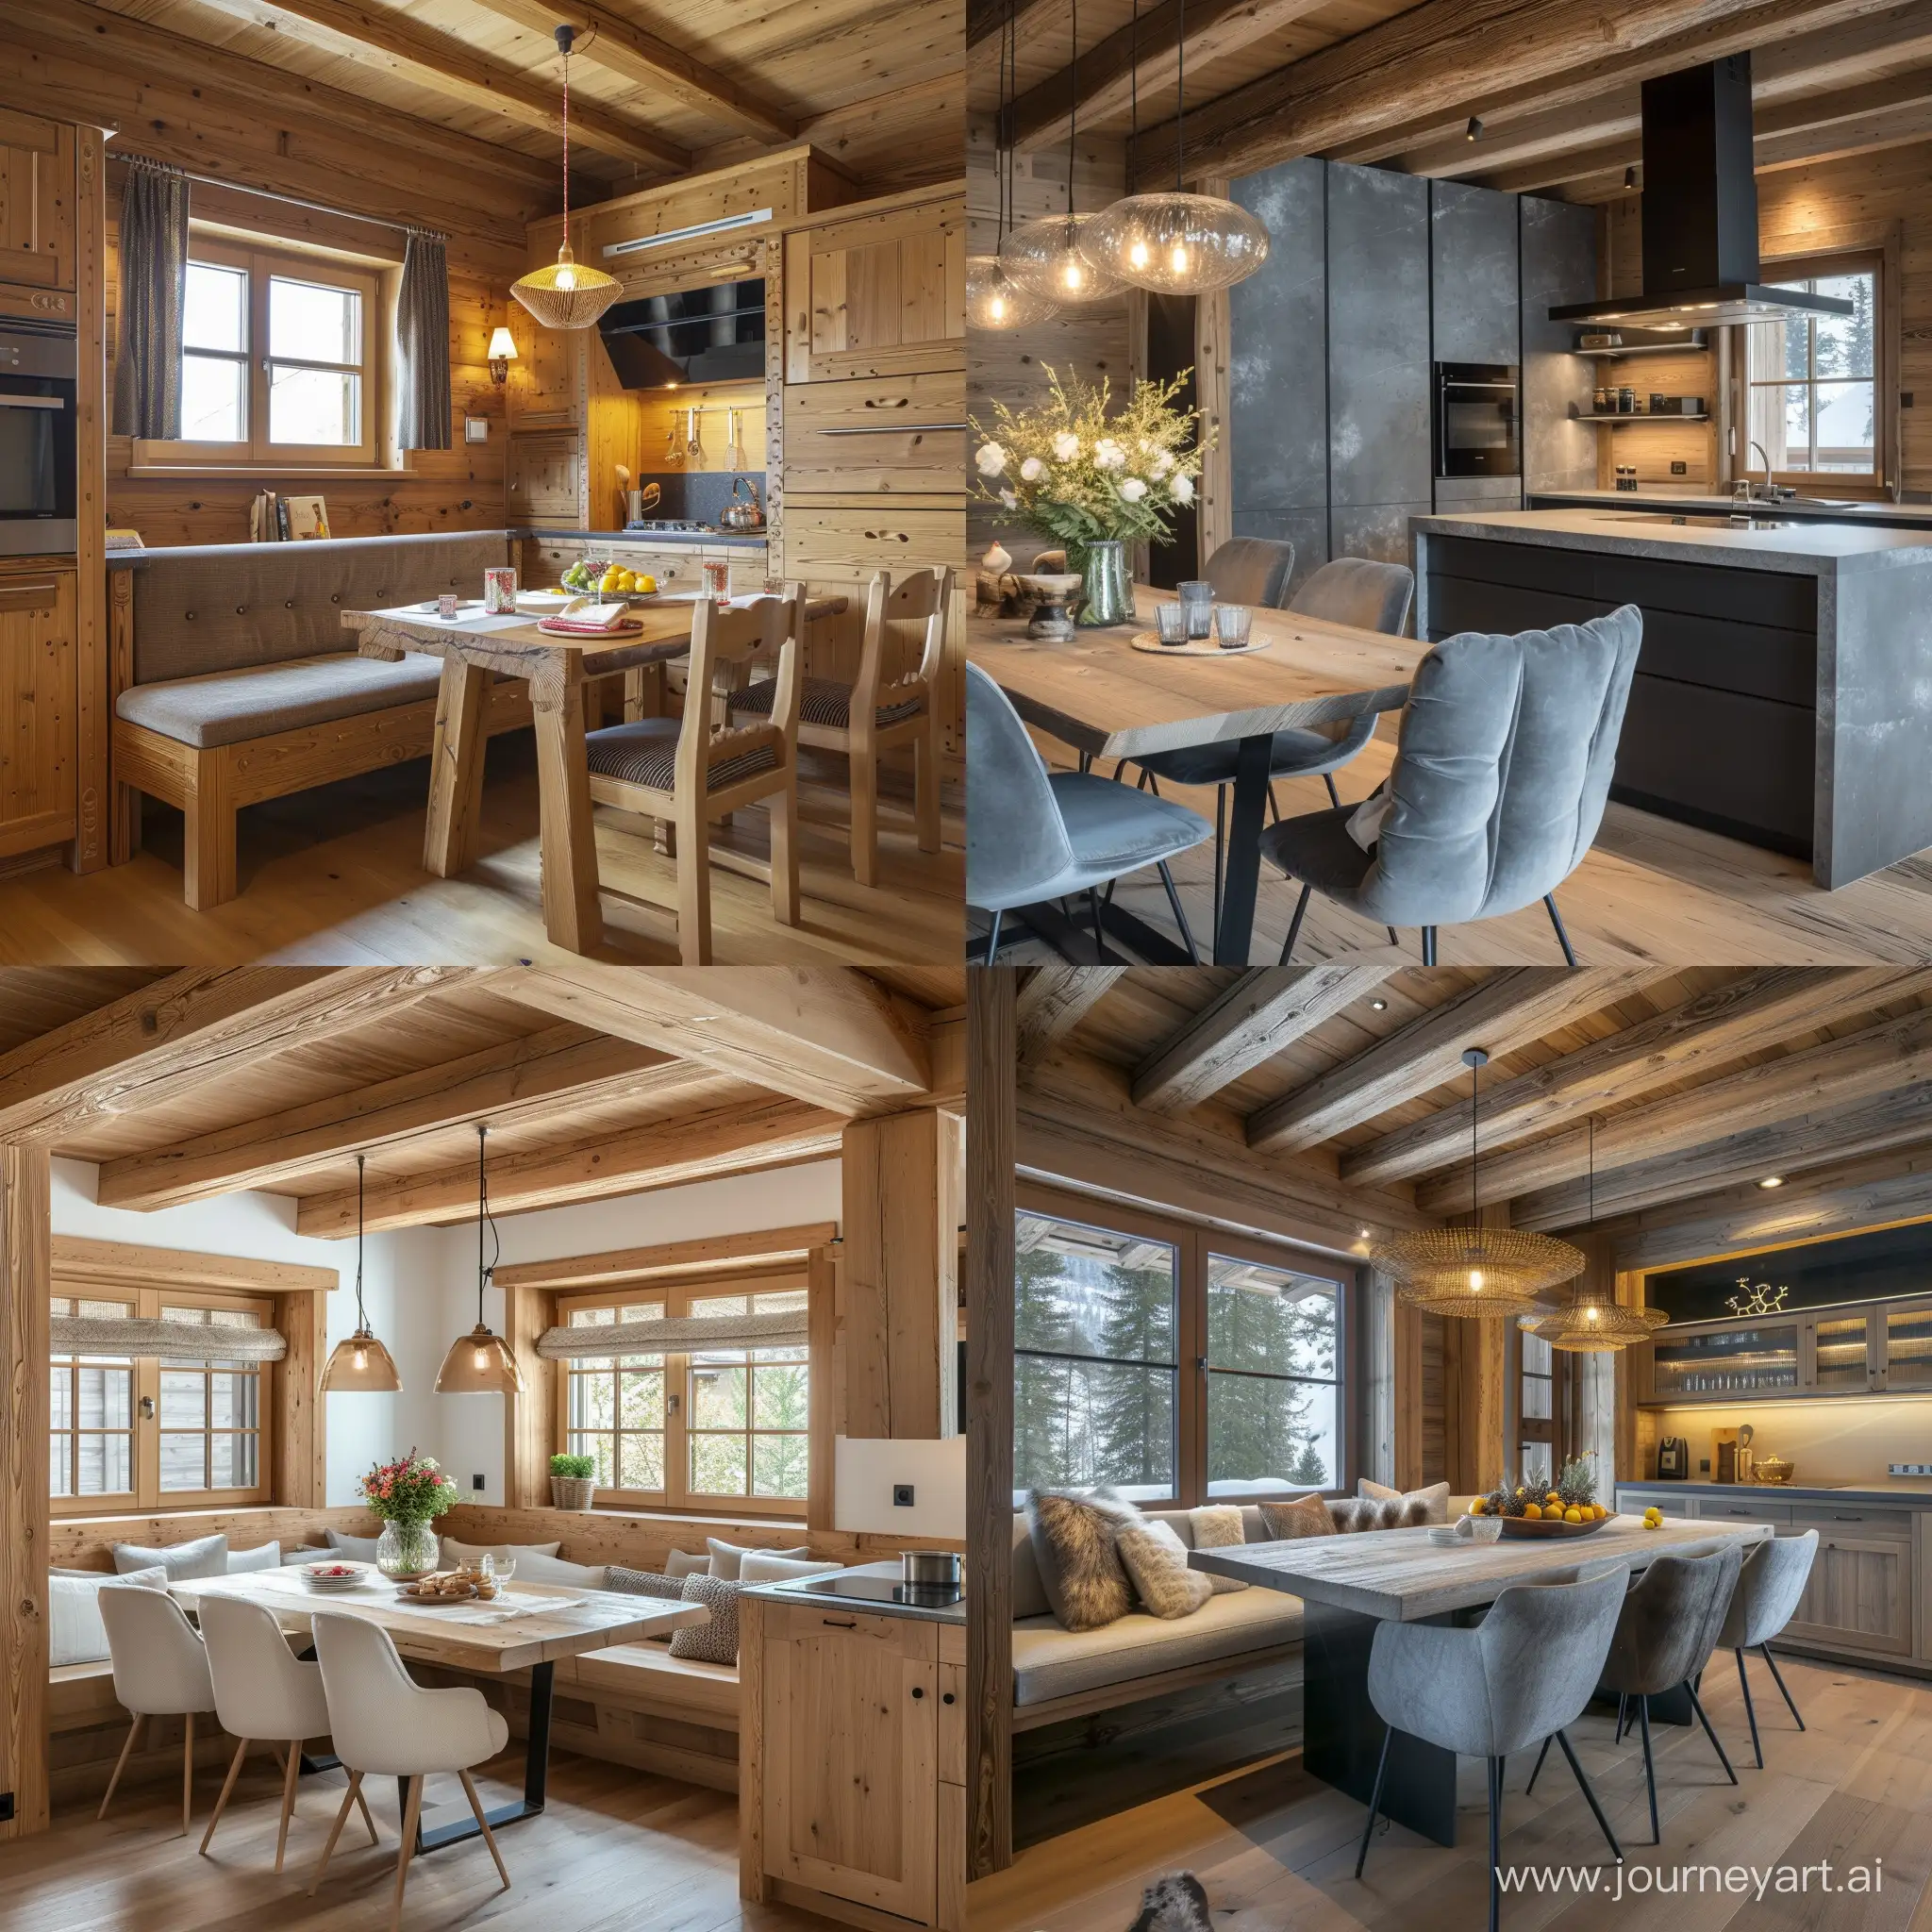 Cozy-Chalet-Kitchen-Dining-Area-with-Rustic-Charm